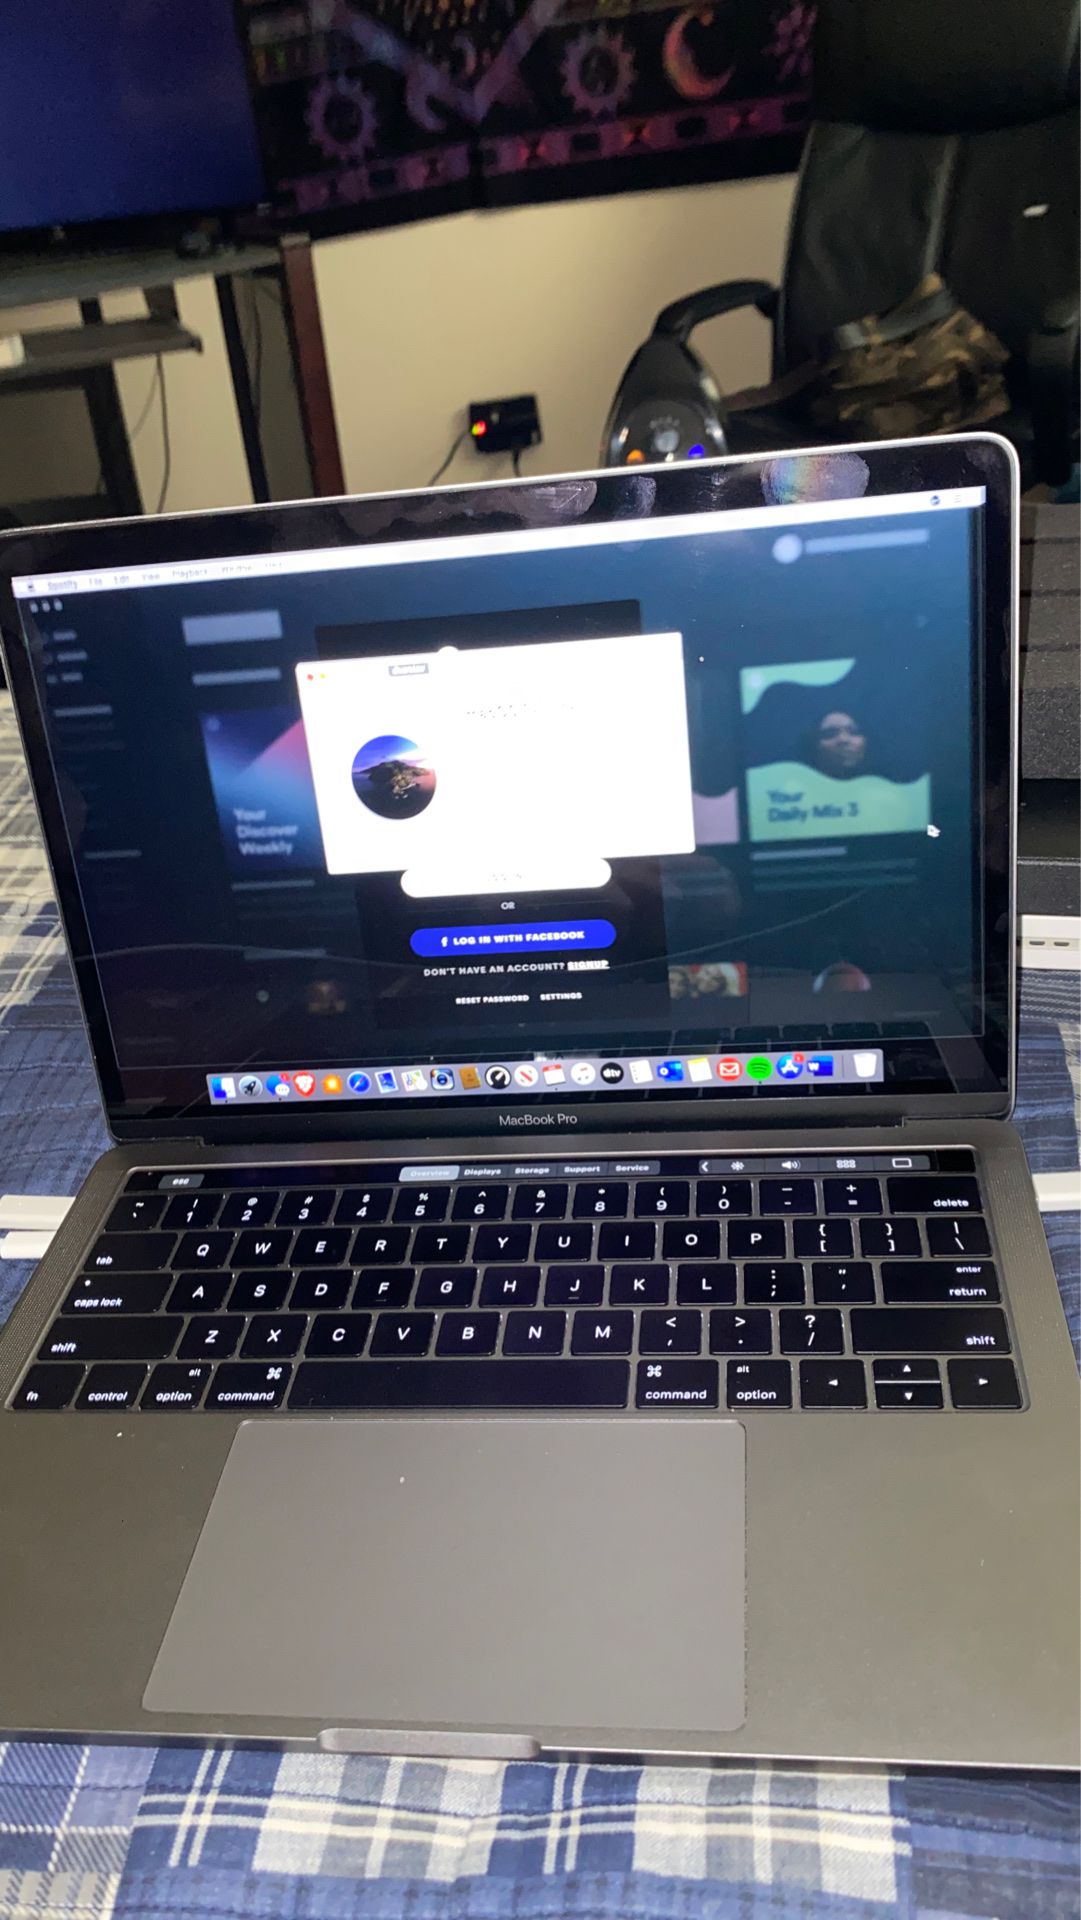 MacBook Pro (late 2016) 2.9ghz i5 cpu , 8gb ram, 256gb ssd (perfect condition)